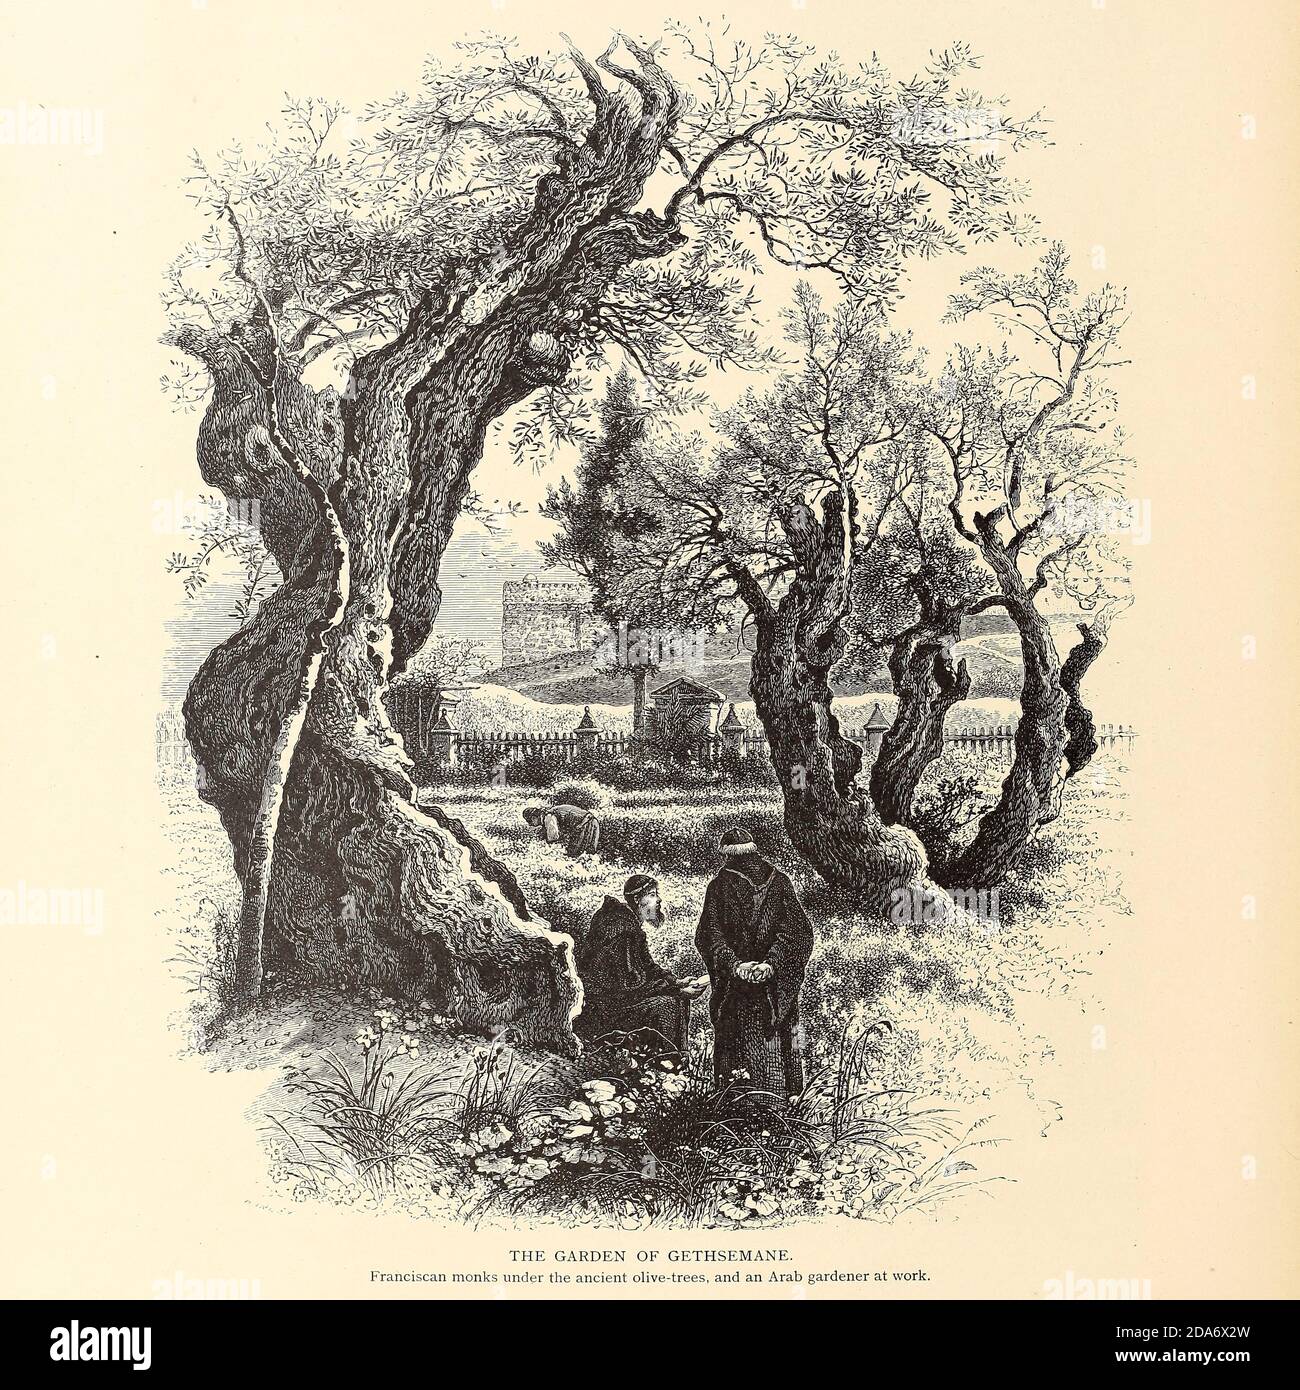 The Garden of Gethsemane Franciscan monks under the ancient olive trees. An Arab gardener at work in the background. from the book Picturesque Palestine, Sinai, and Egypt By  Colonel Wilson, Charles William, Sir, 1836-1905. Published in New York by D. Appleton and Company in 1881  with engravings in steel and wood from original Drawings by Harry Fenn and J. D. Woodward Volume 1 Stock Photo